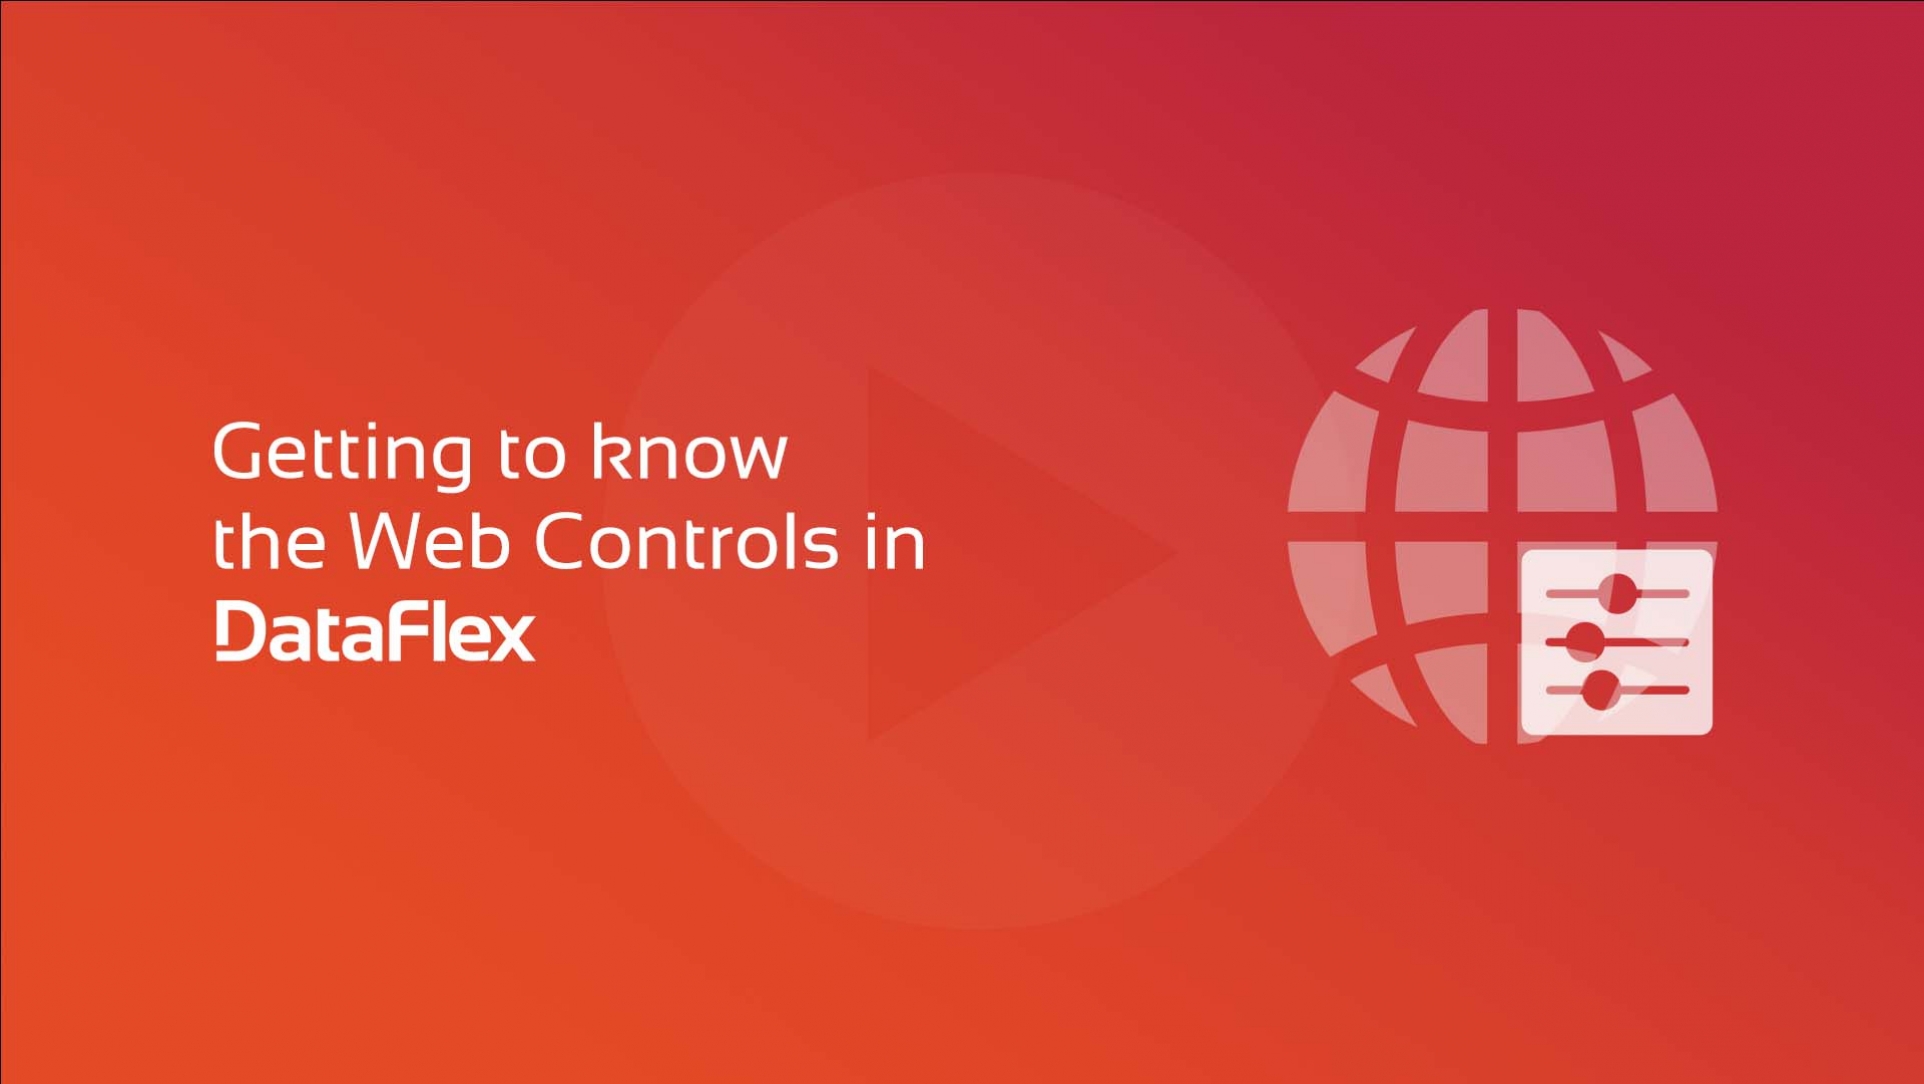 Getting to know the Web Controls in DataFlex